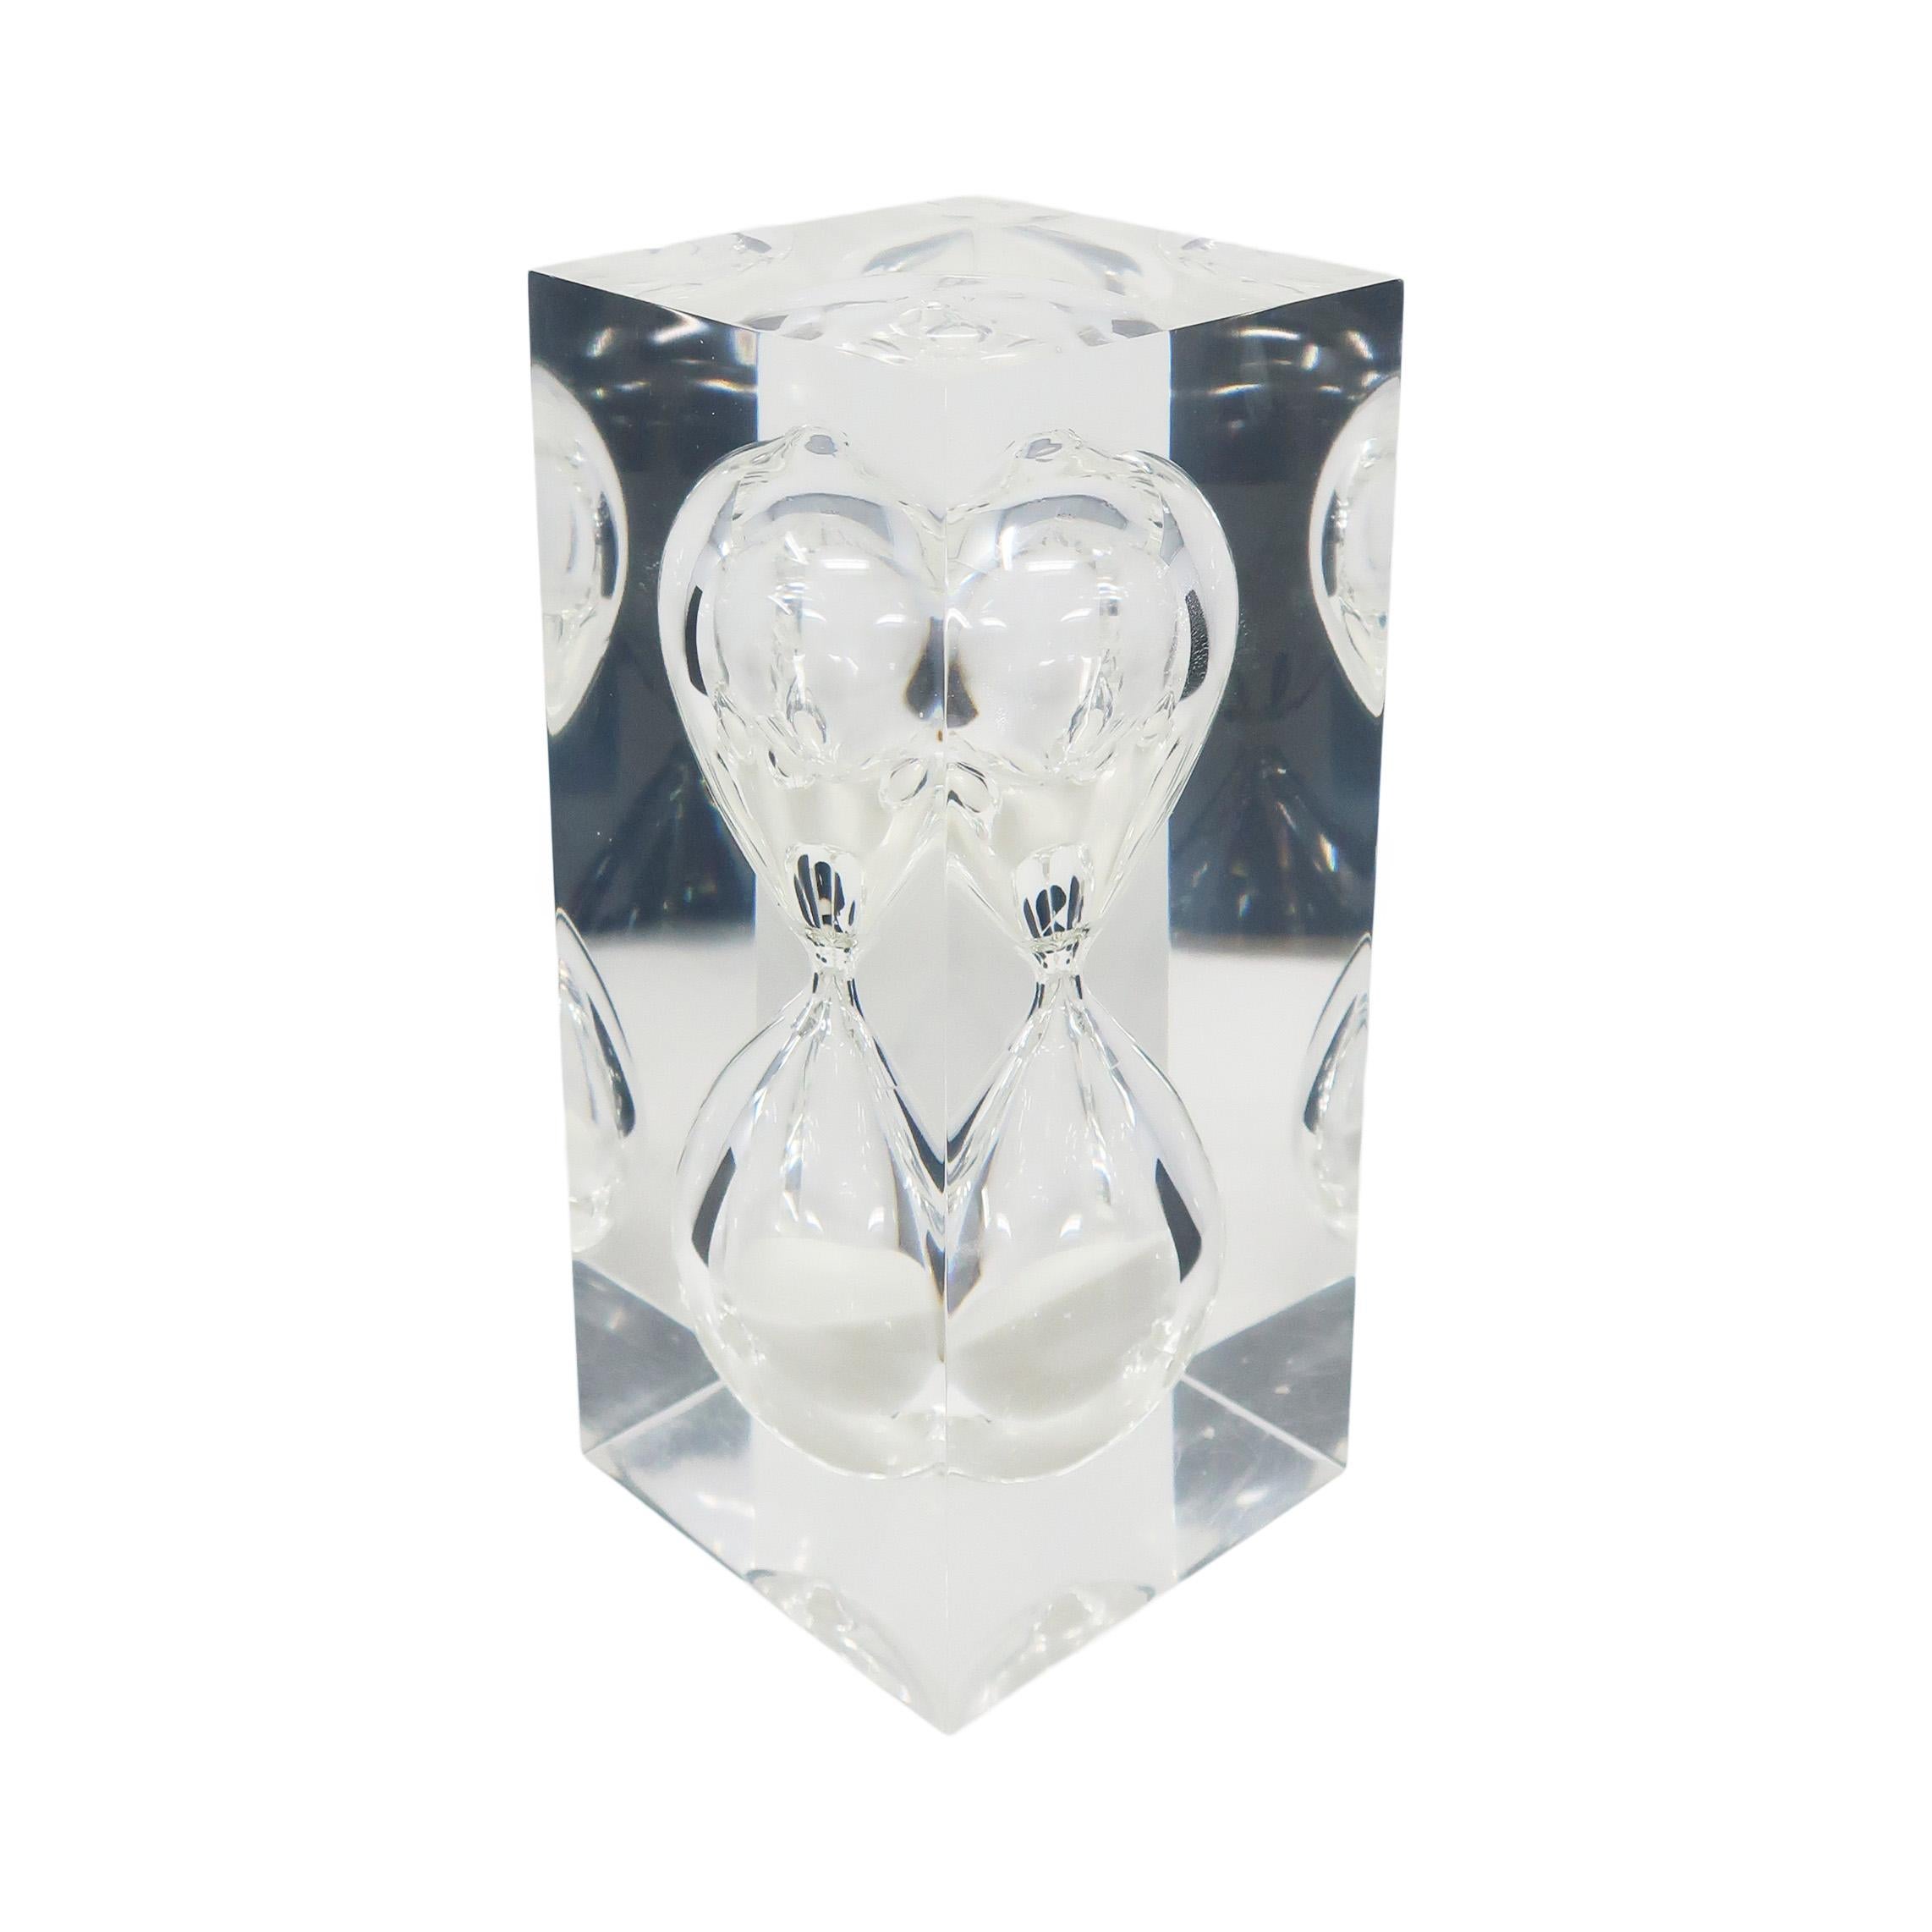 A striking and whimsical late mid-century sculpture, paperweight and crowd-pleasing decor item, this piece is attributed to Pierre Giraudon, an artist and designer known for suspending items in lucite in his designs. For this Pop Art piece, an